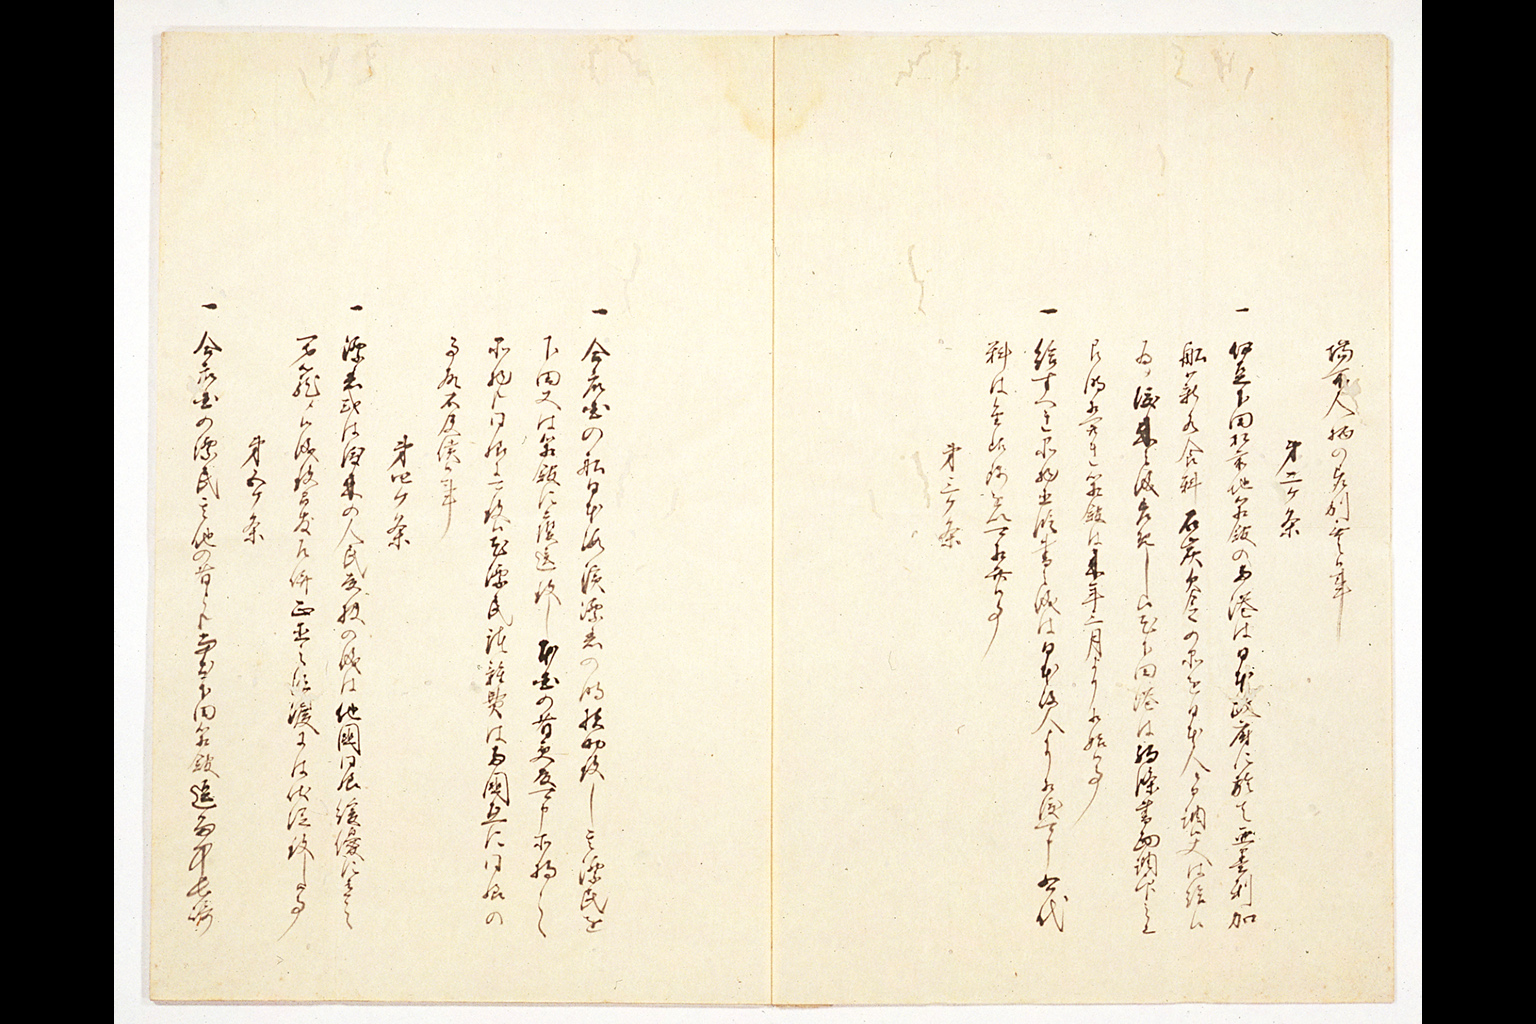 Copy of the U.S.-Japan Treaty of Peace and Amity(larger)